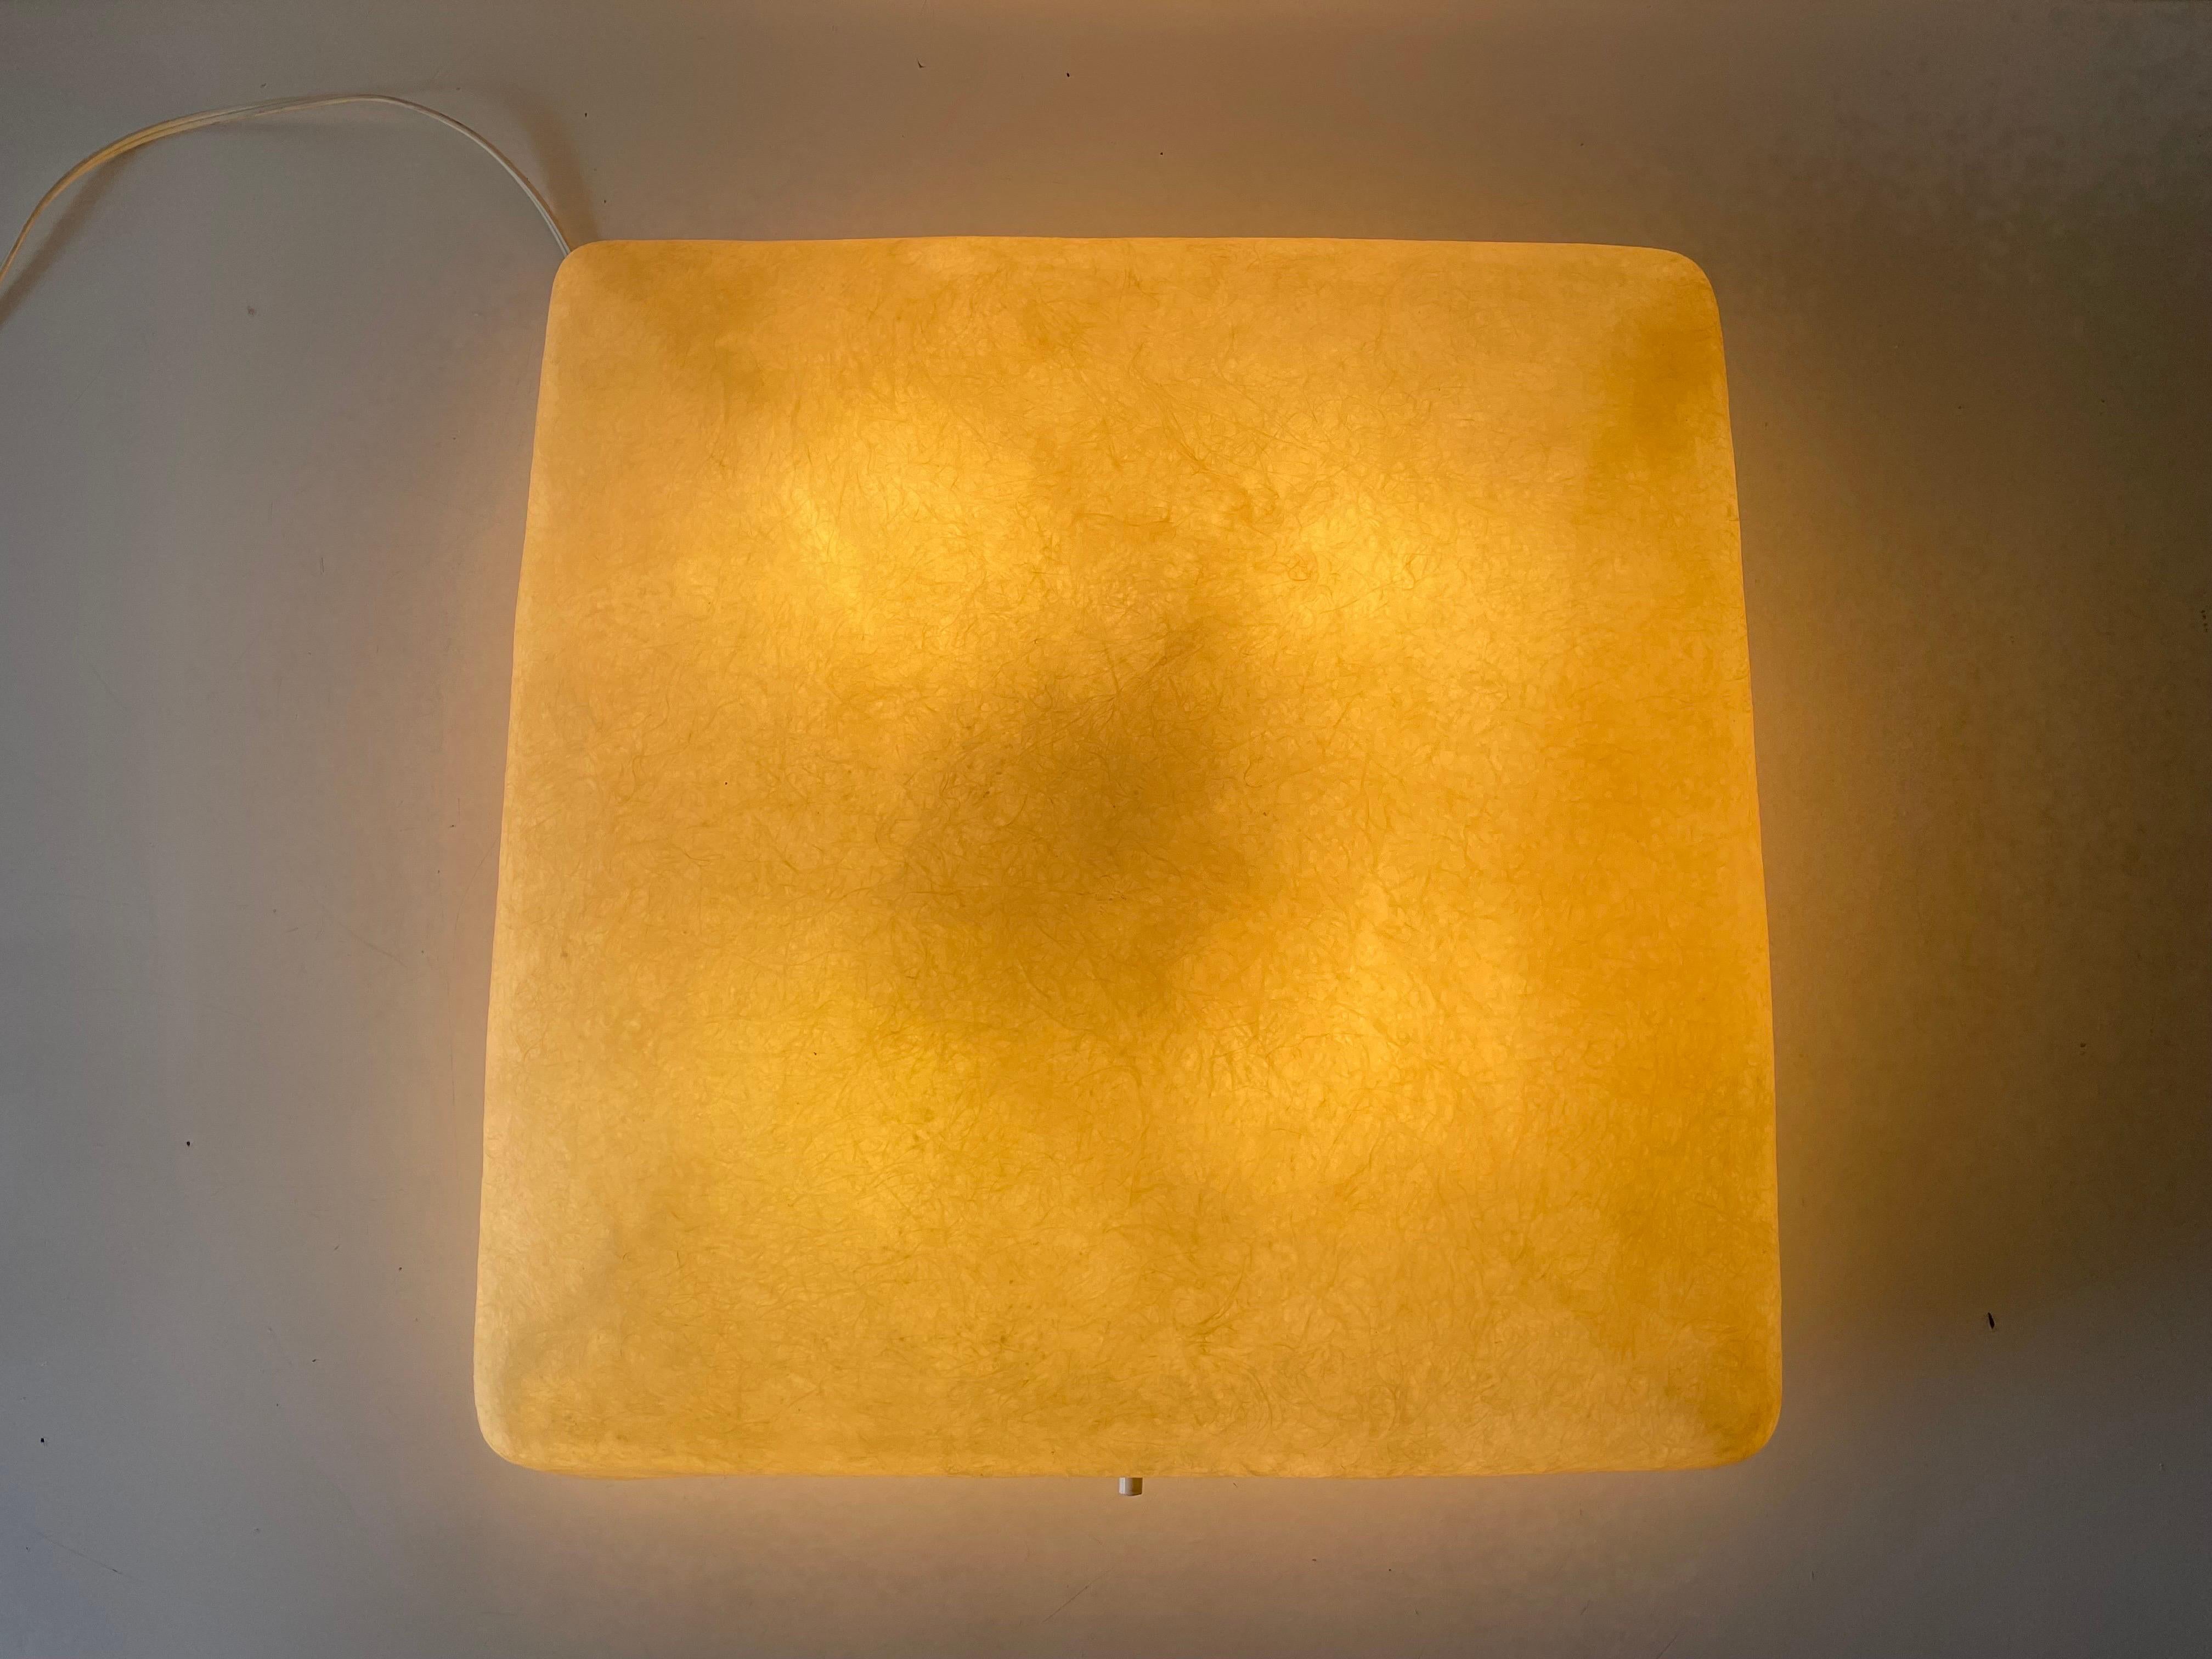 Rare Square Design Polyester Large Flush Mount Ceiling Lamp, 1960s, Germany For Sale 4